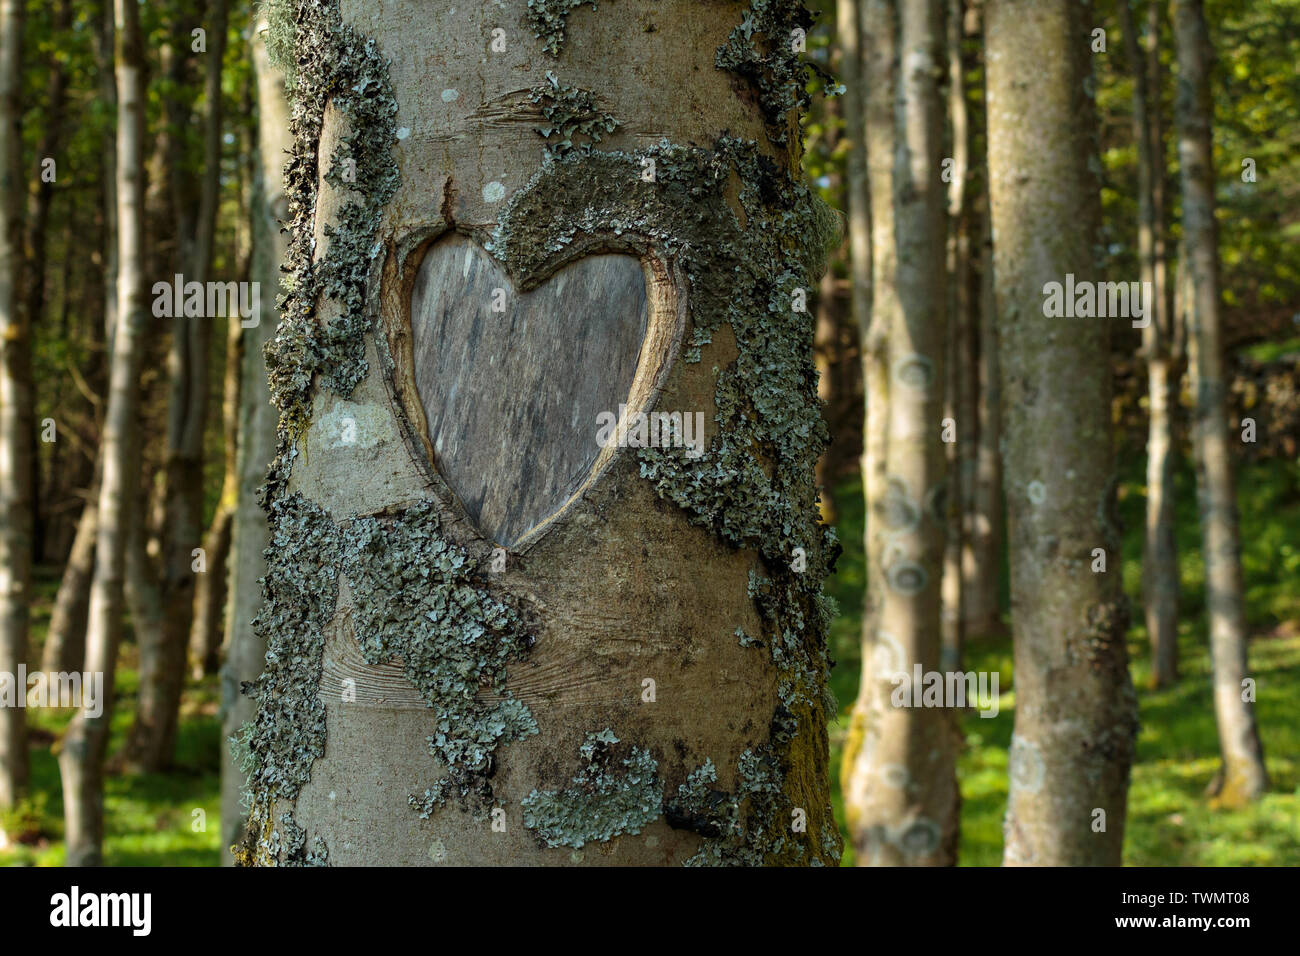 Tree-Carving of Heart Shape on Lichen-covered Bark. Stock Photo